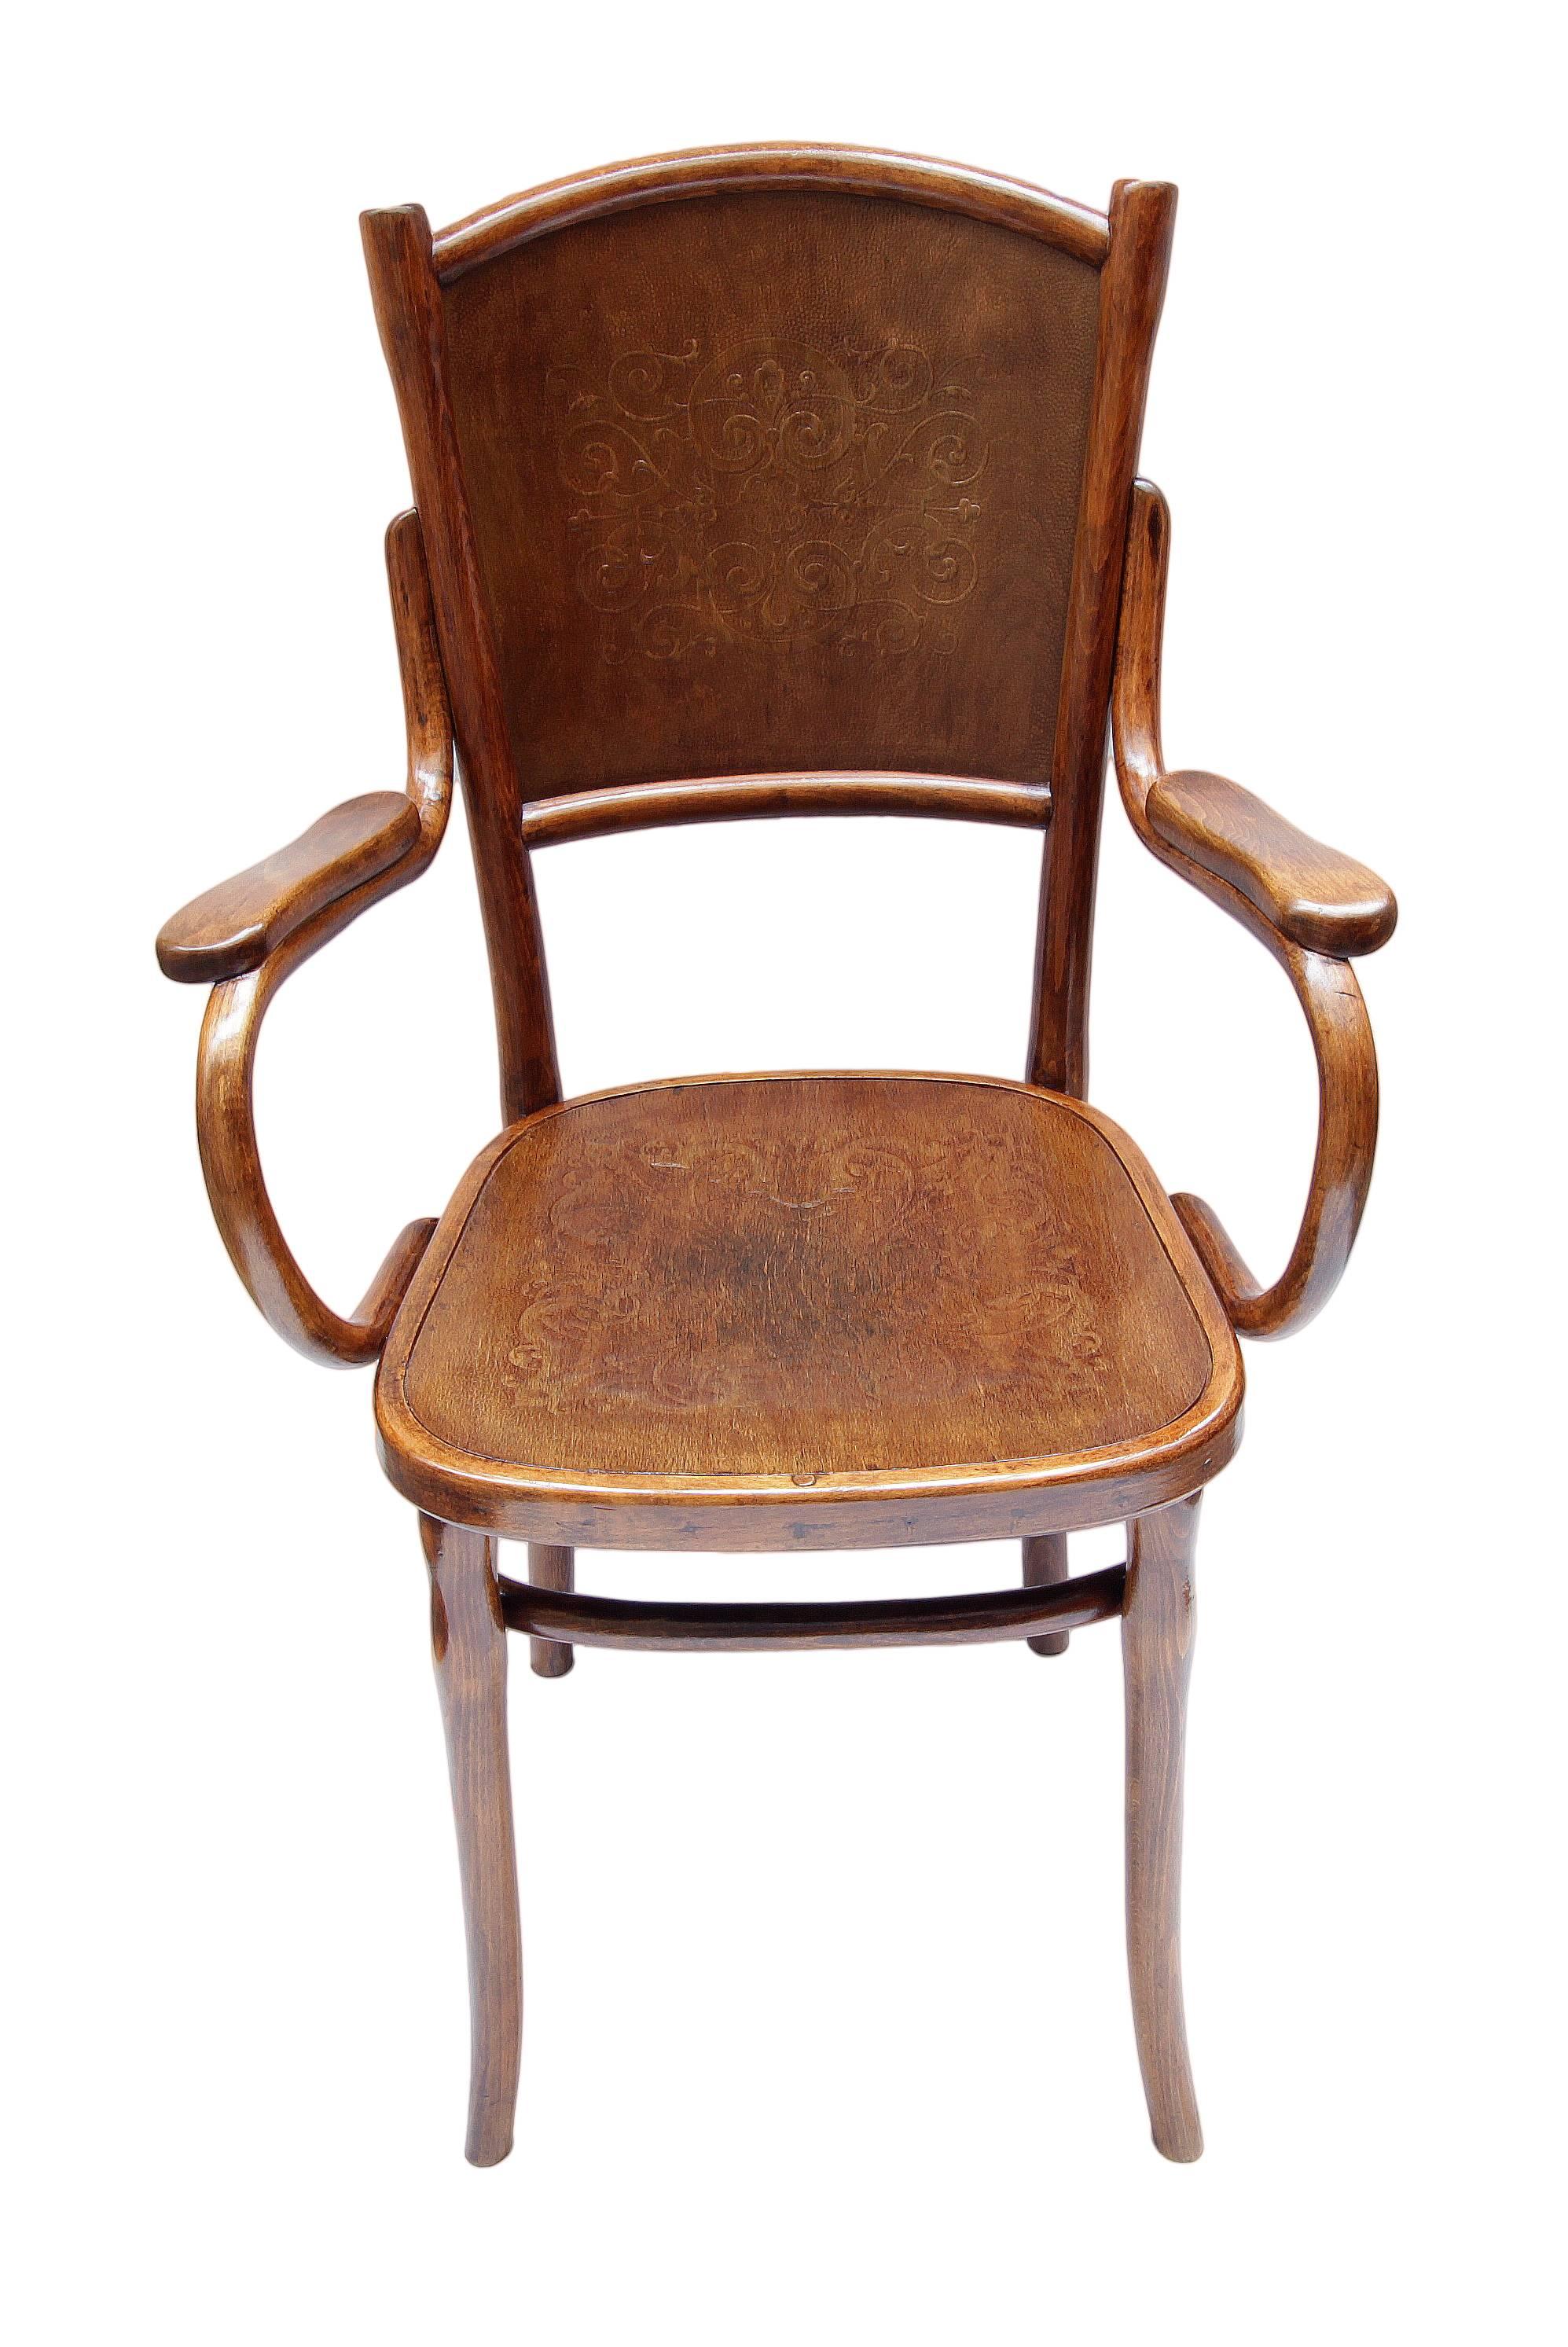 Beautiful armchair from the time of Art Nouveau. Made of bentwood, according to the principle as Thonet or Kohn, but not signed / stamped. Seat and back surface covered with relief ornament. Very good restored condition.